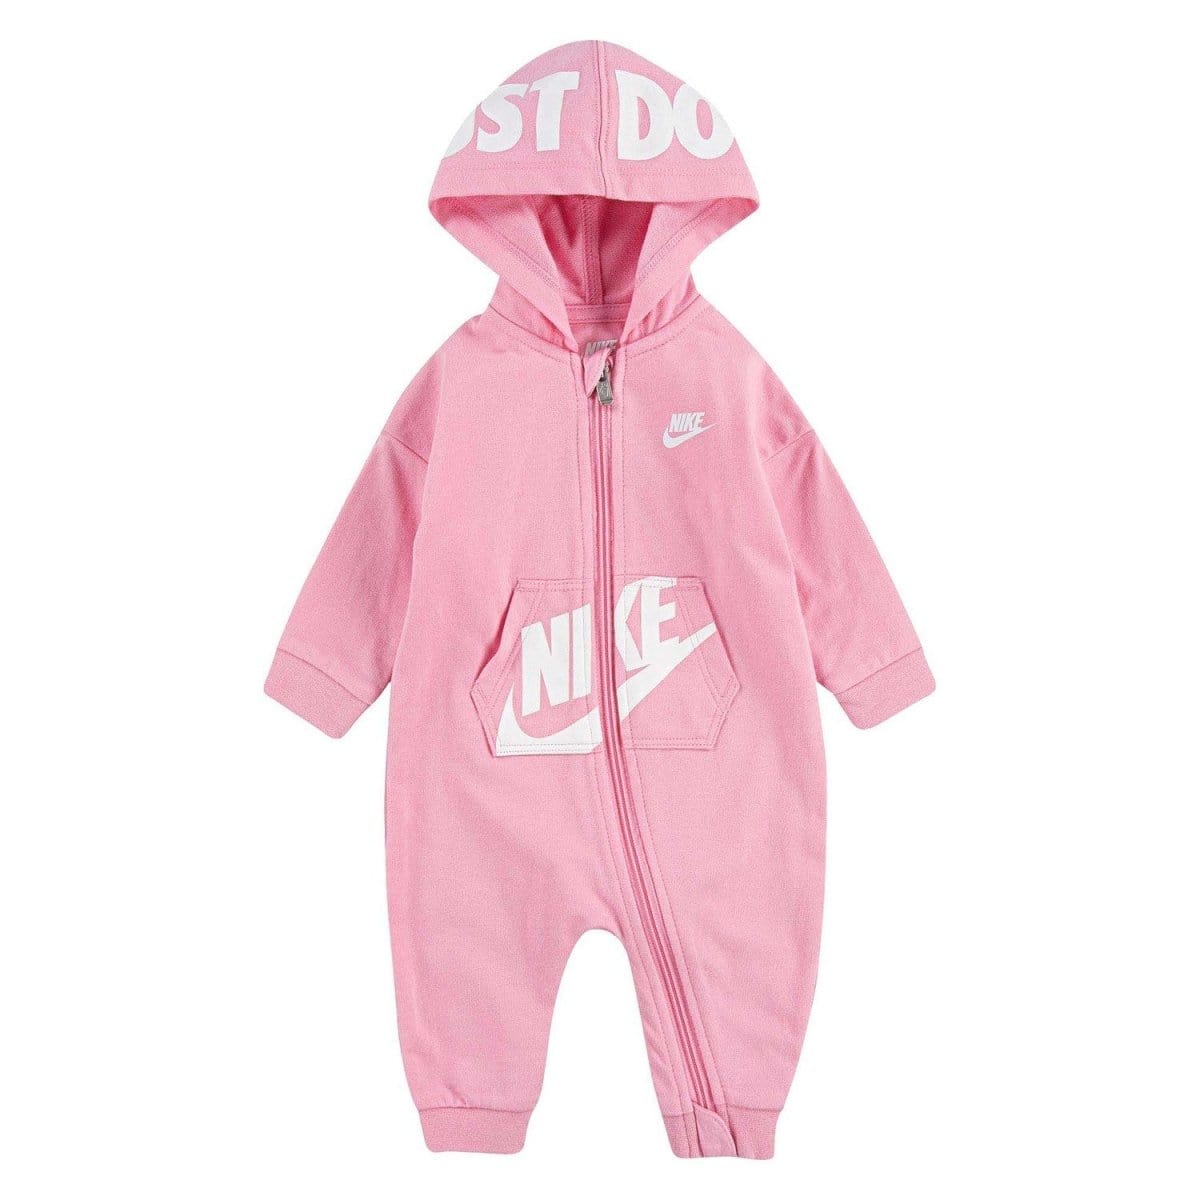 Nike NIKE INFANT'S HOODED PINK COVERALL ONESIE - INSPORT